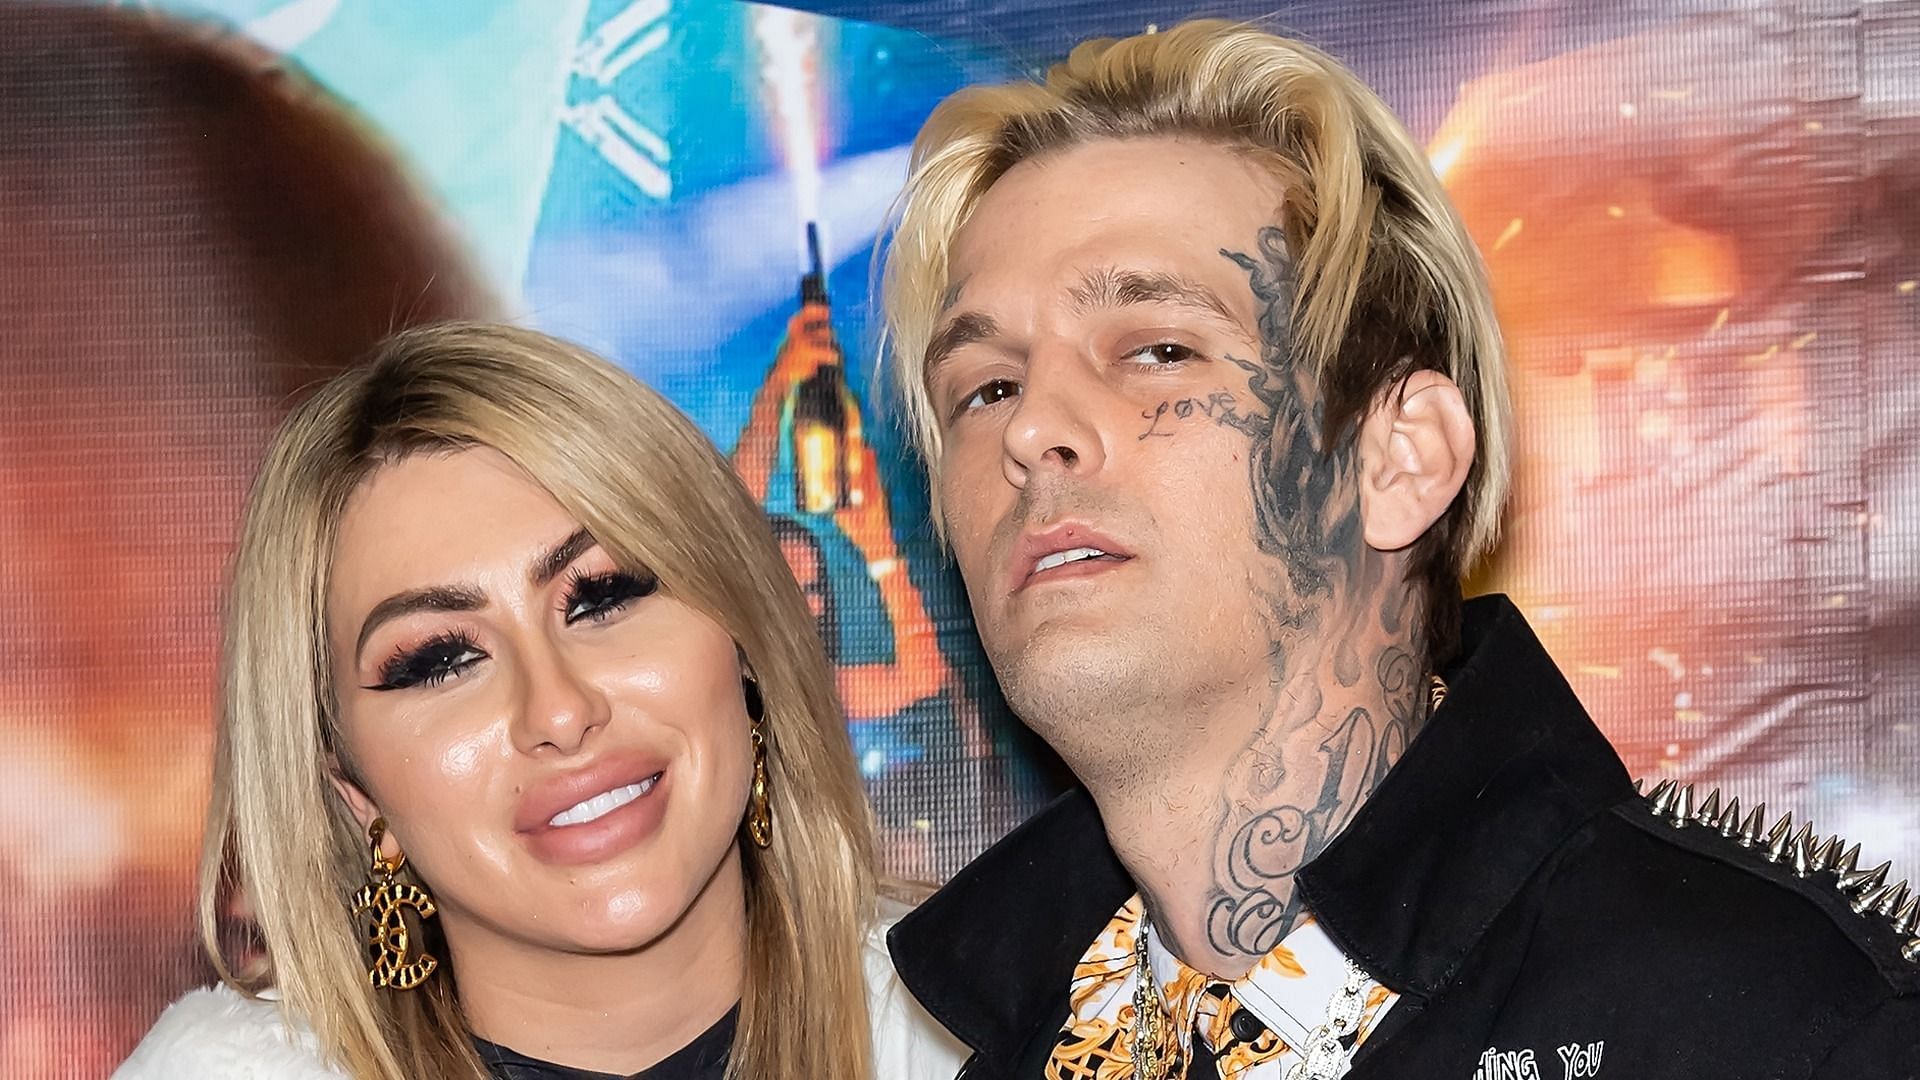 Aaron Carter and Melanie Martin have had a rocky relationship since the beginning (Image via Getty Images/ Gilbert Carrasquillo)